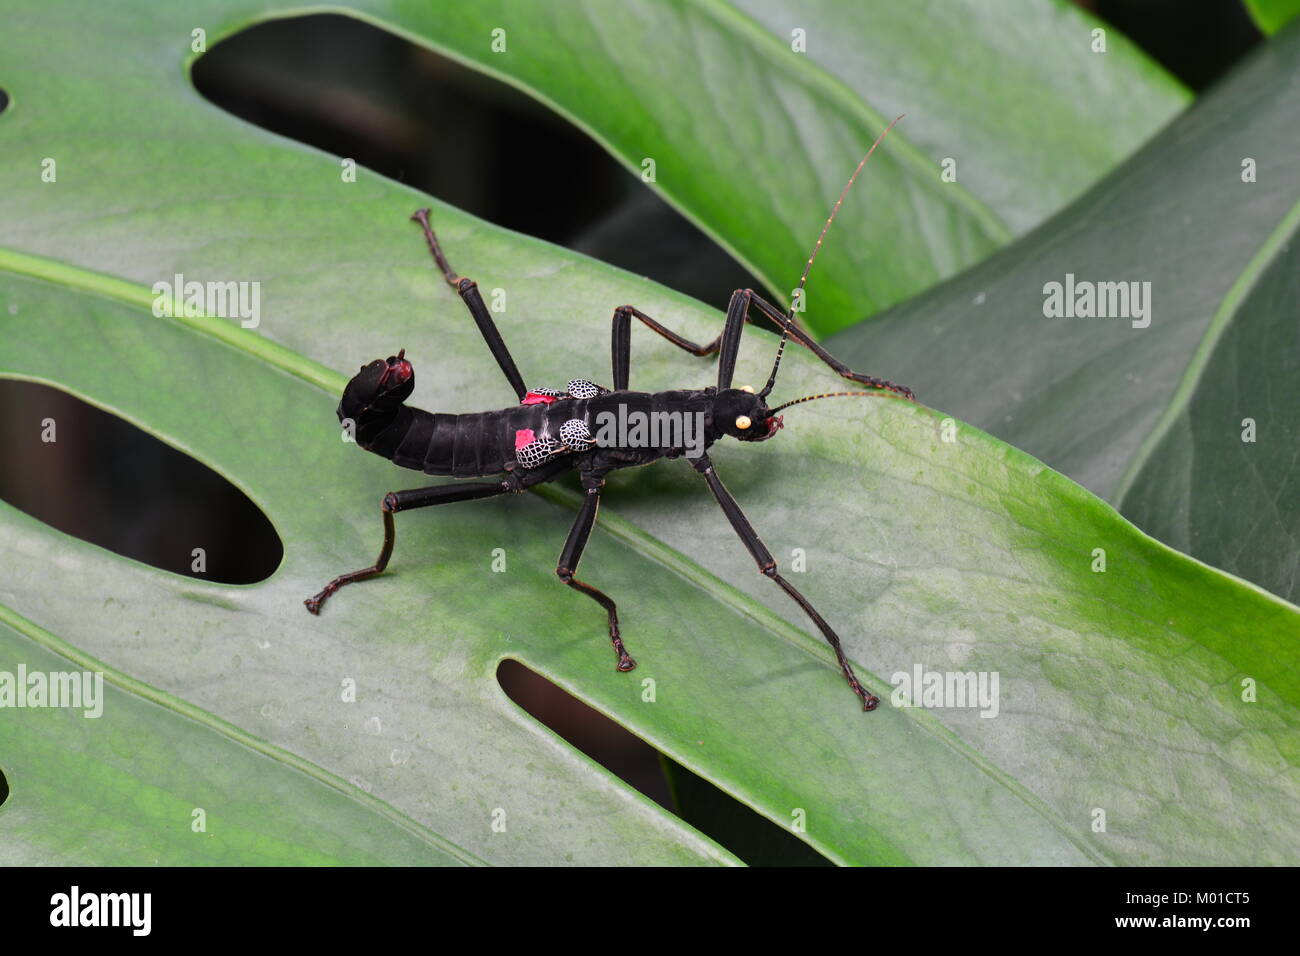 A Golden-eyed stick insect sits on a plant leaf in the gardens getting its bearings for adventure. Stock Photo